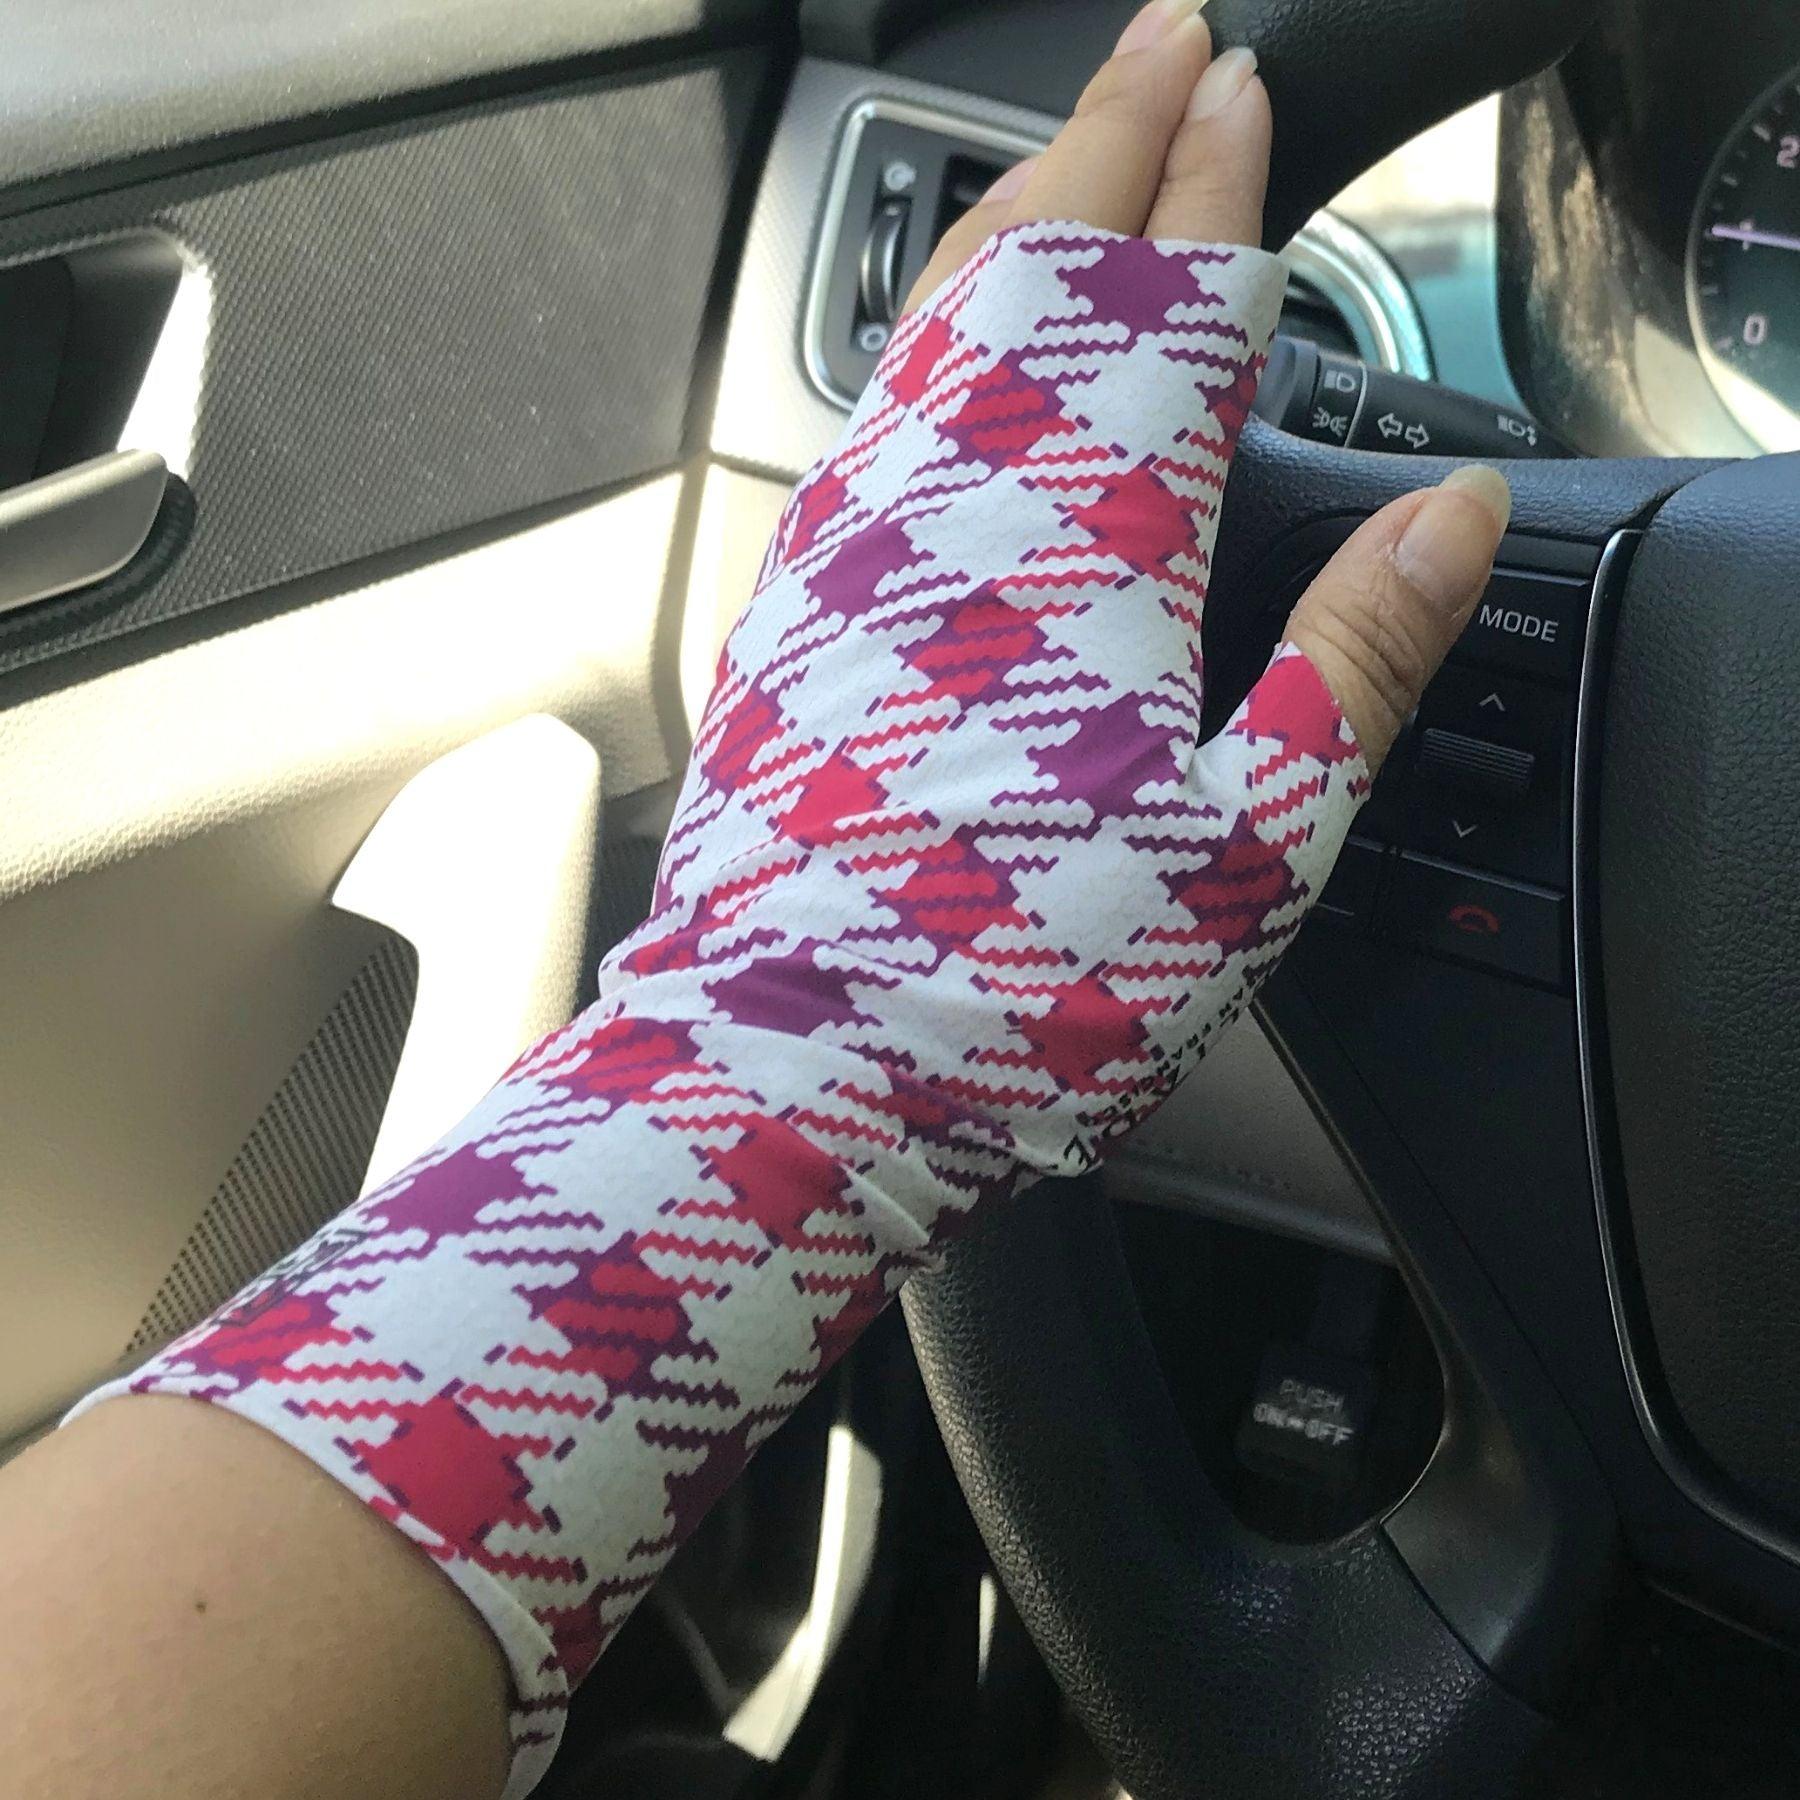 Women's Driving UV Gloves in Coigach Houndstooth Plaid